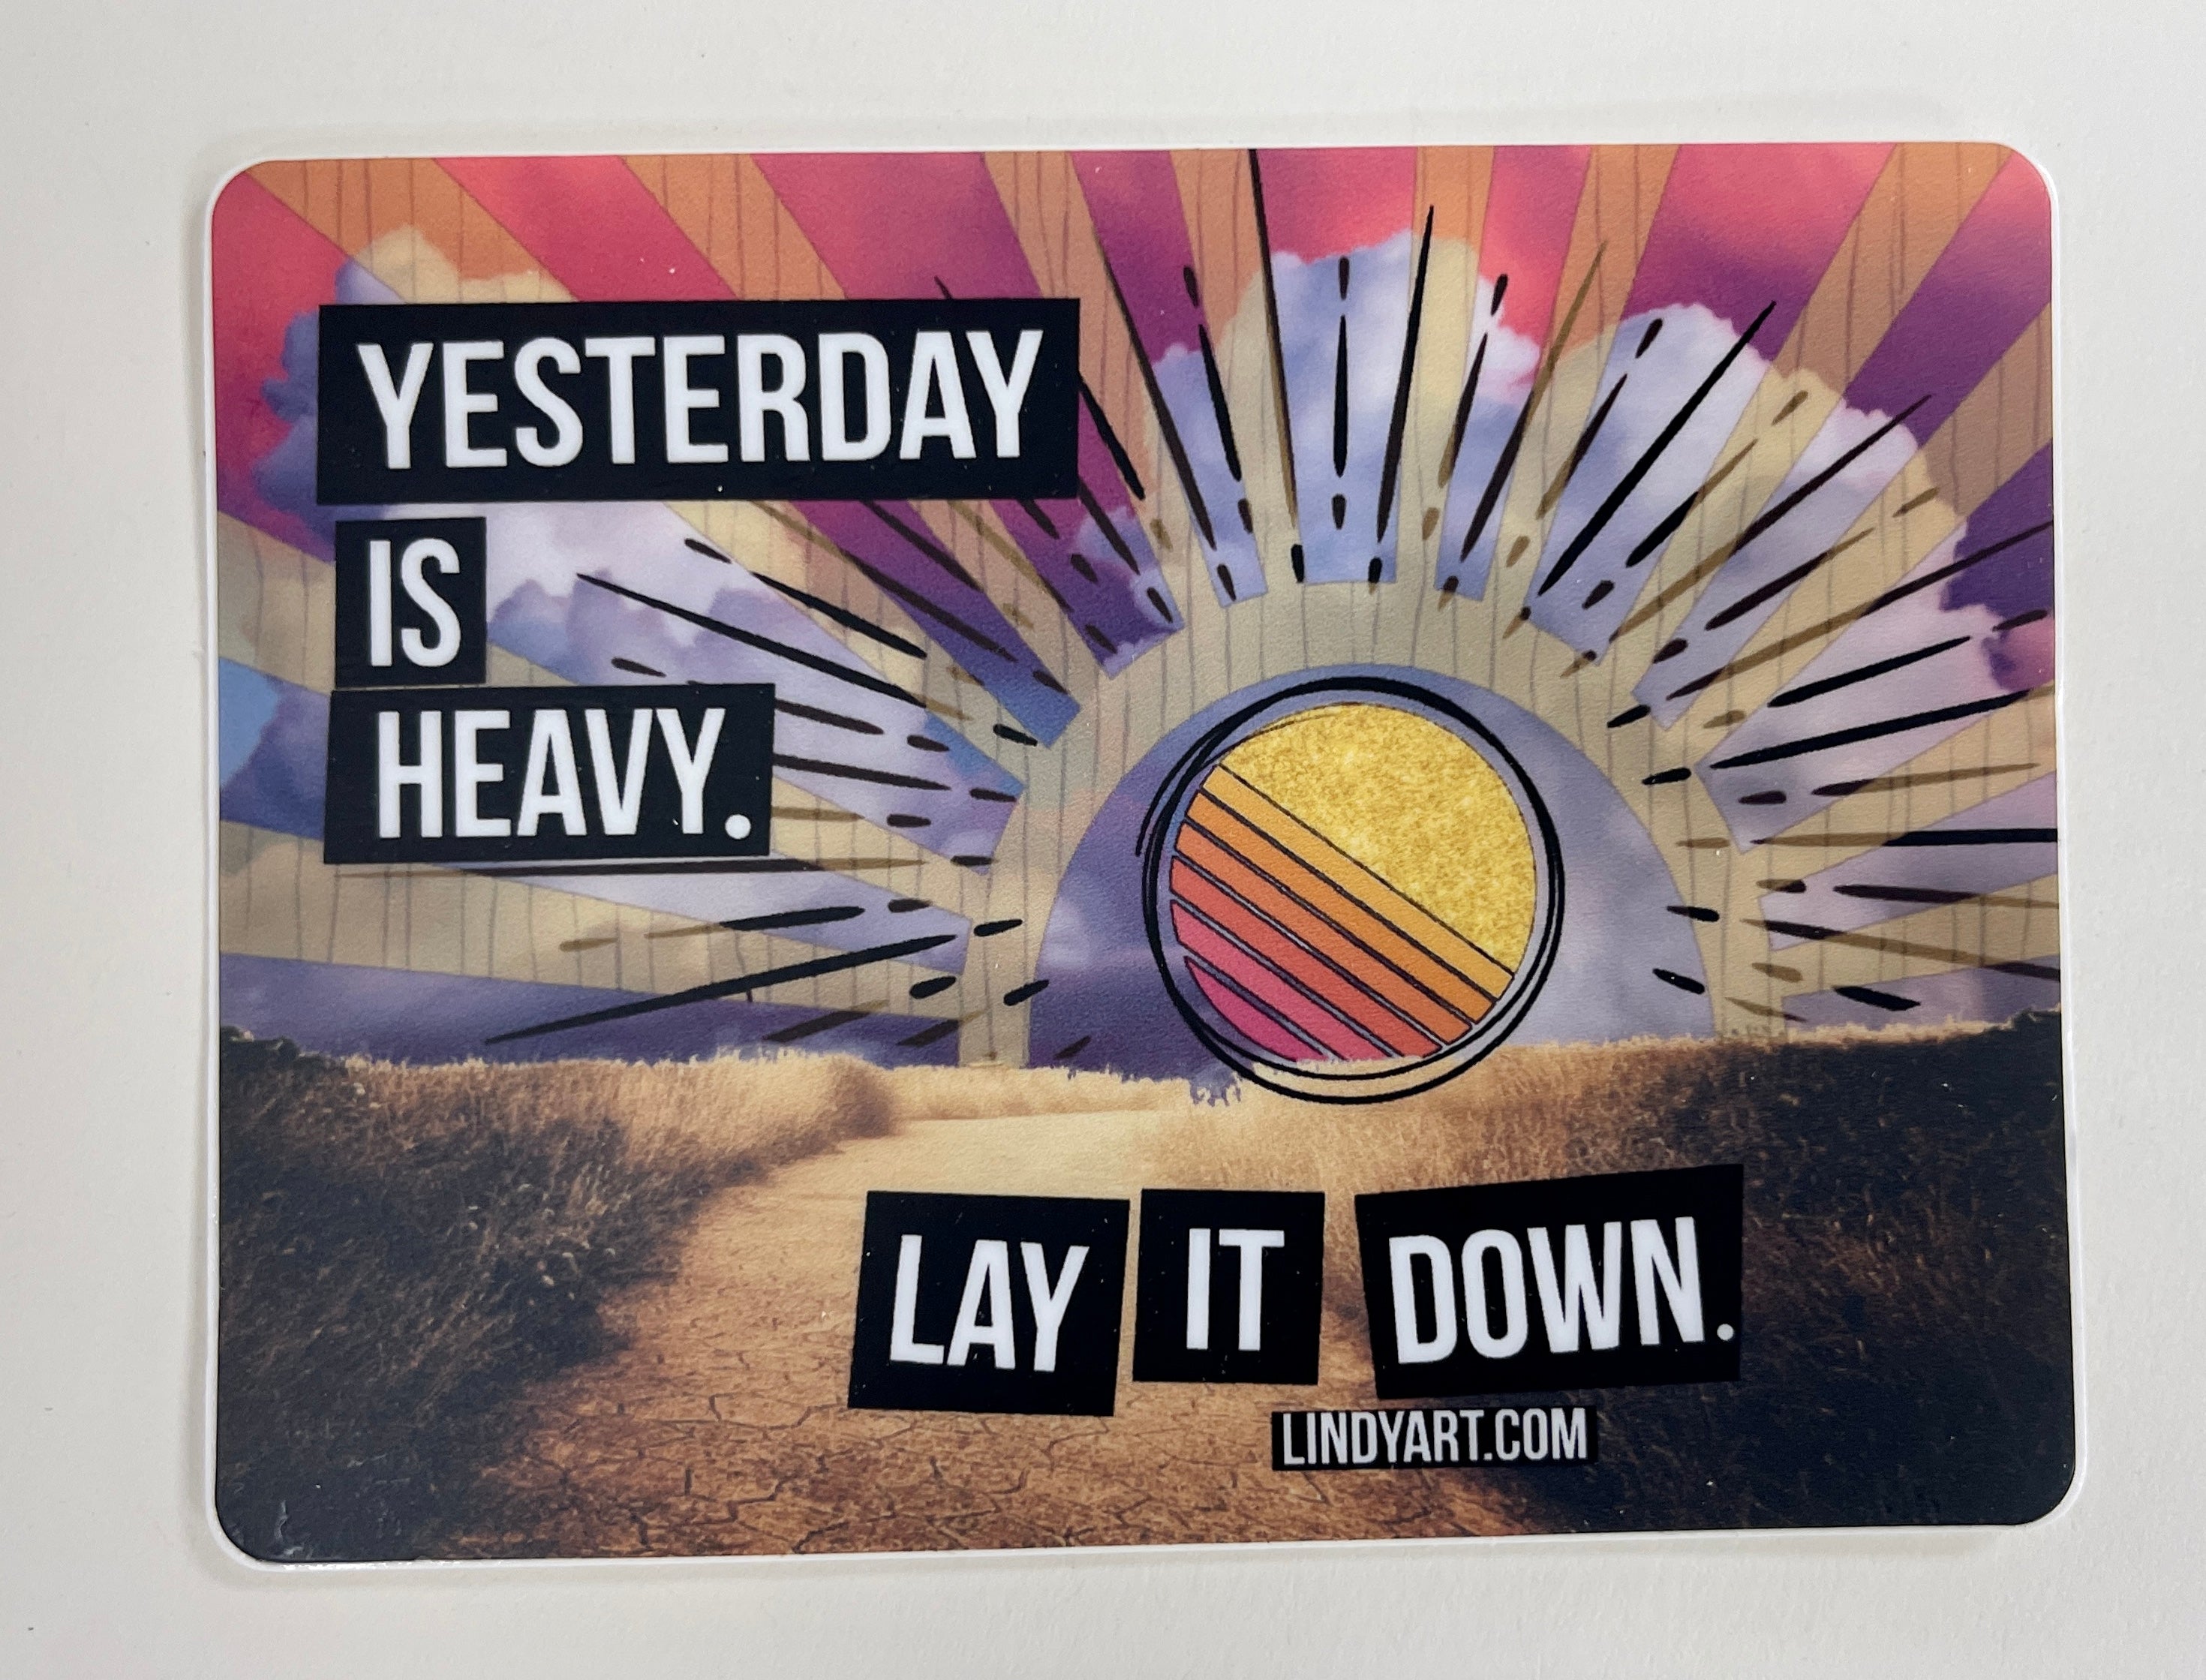 Yesterday is heavy, lay it down